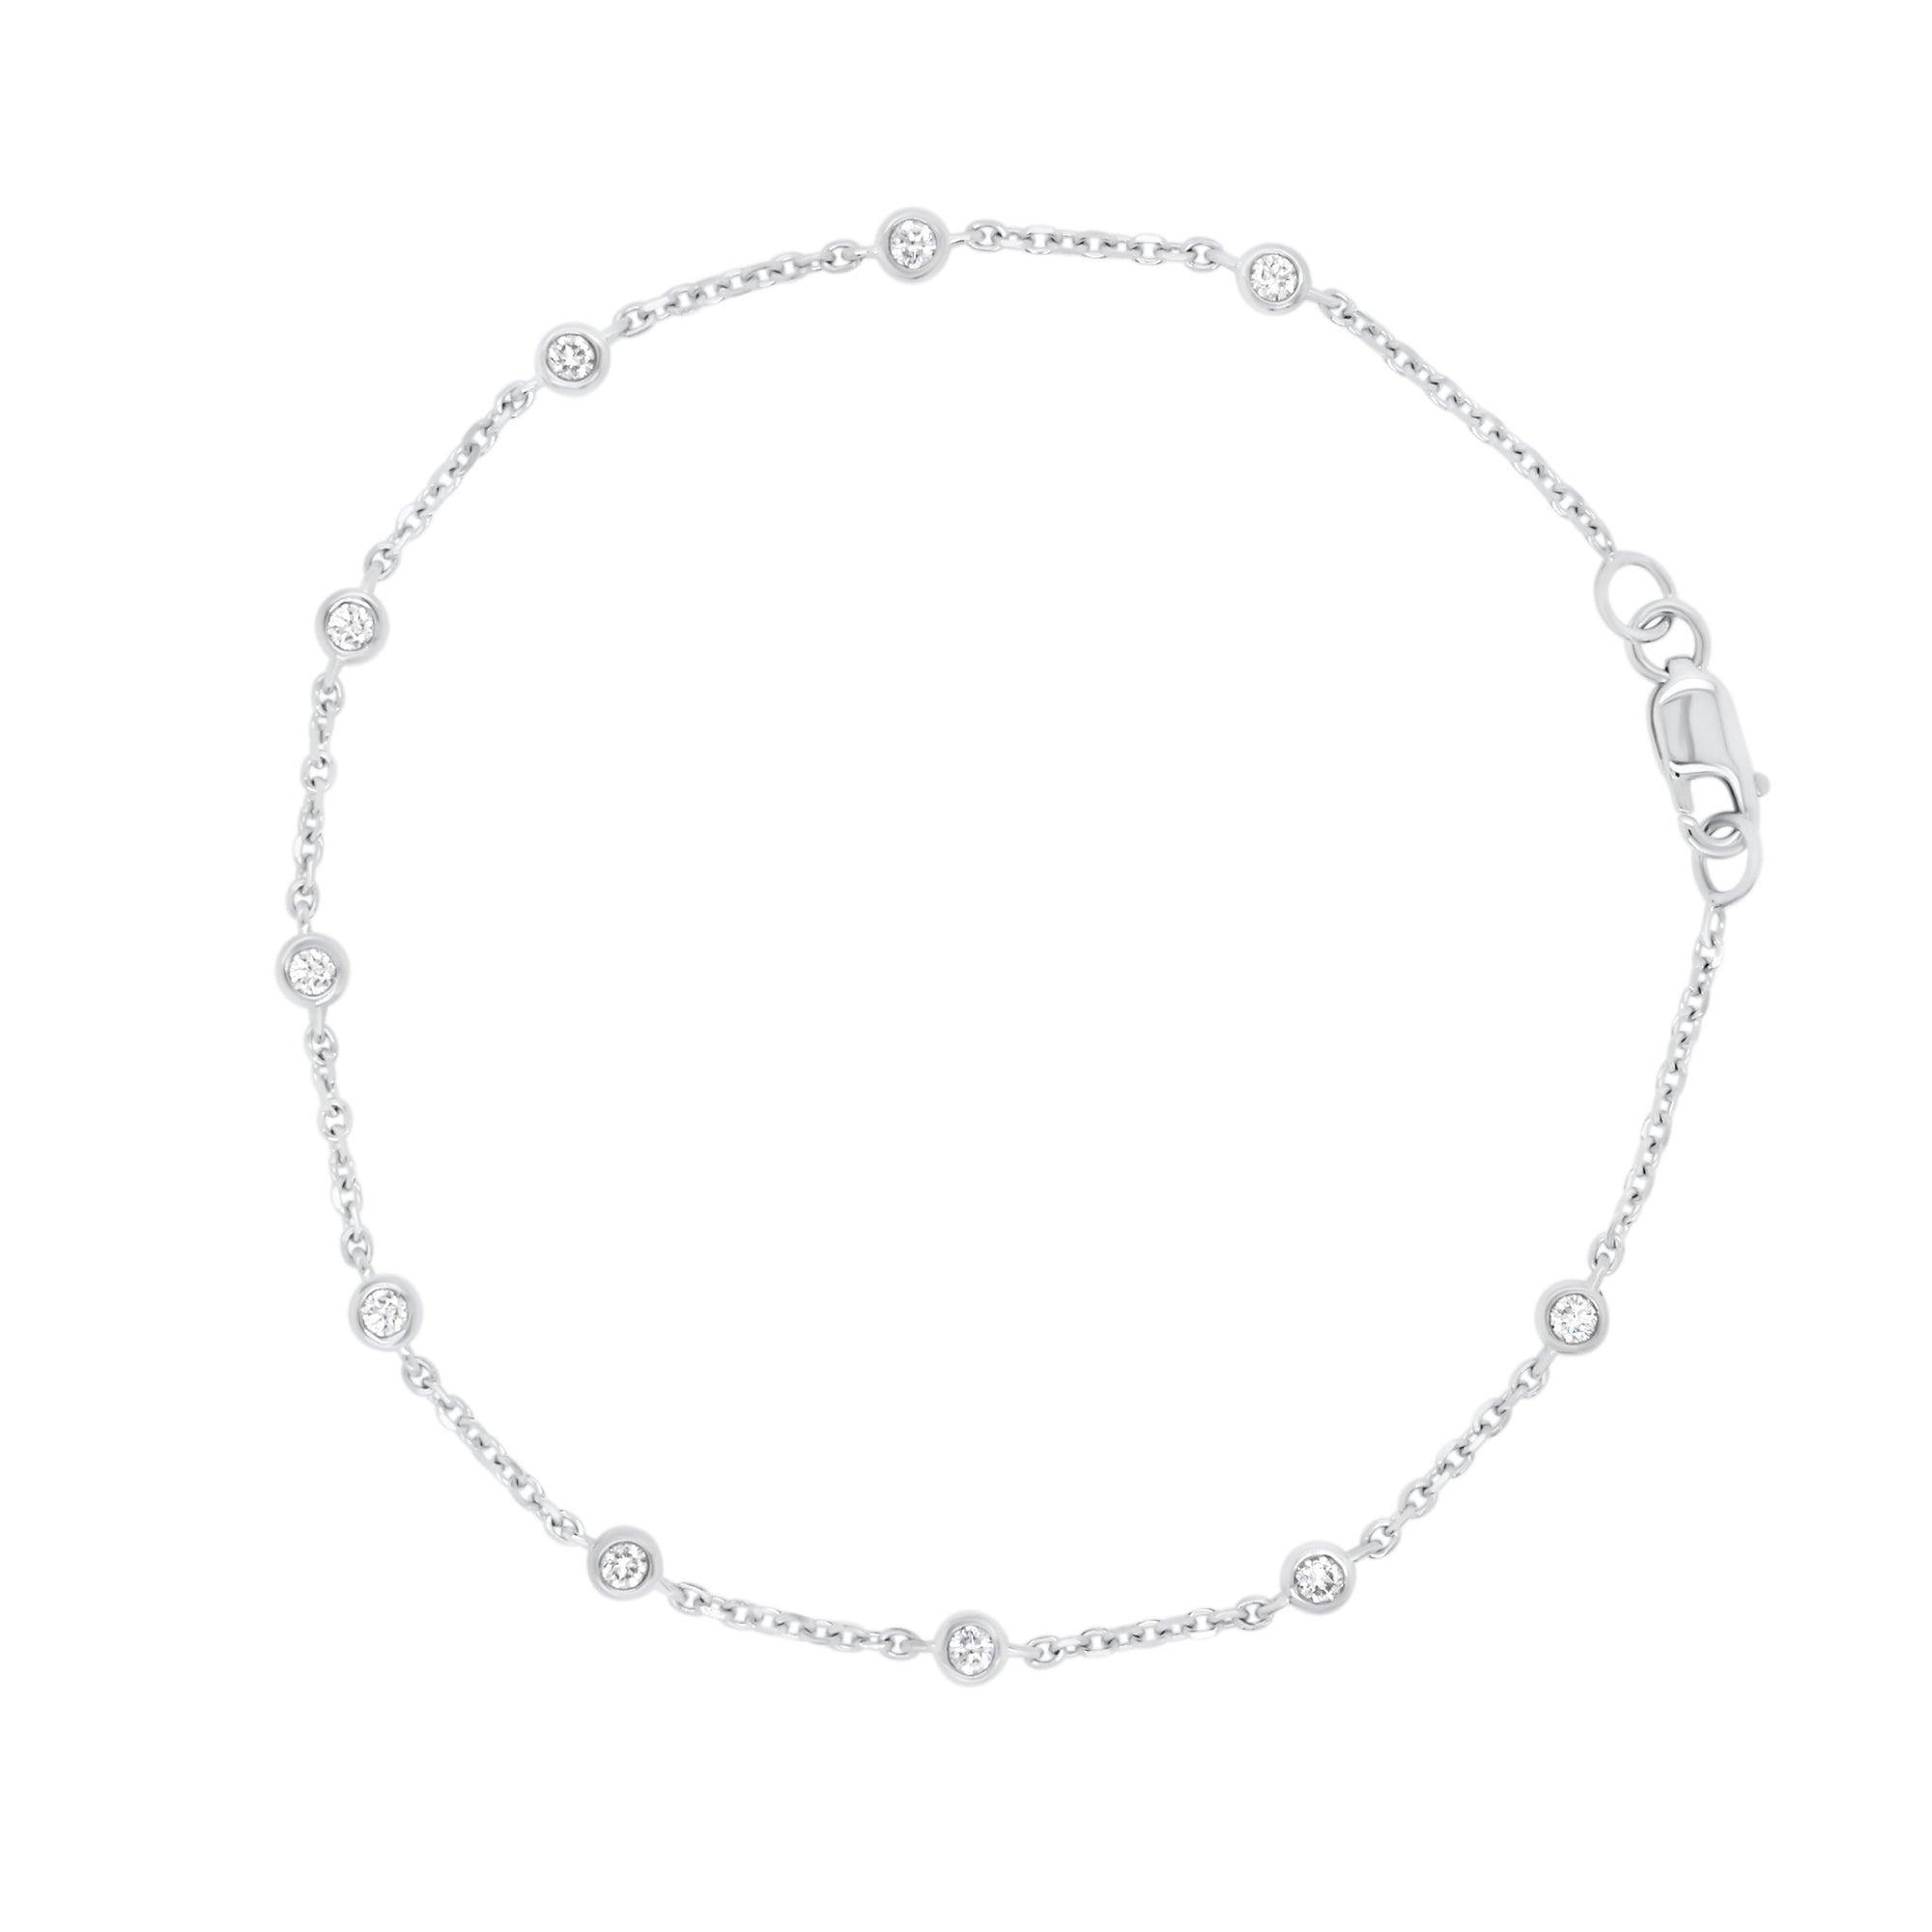 Diamonds by the Yard 10-Stone Bracelet - 18K white gold weighing 2.11 grams - 10 round diamonds totaling 0.28 carats